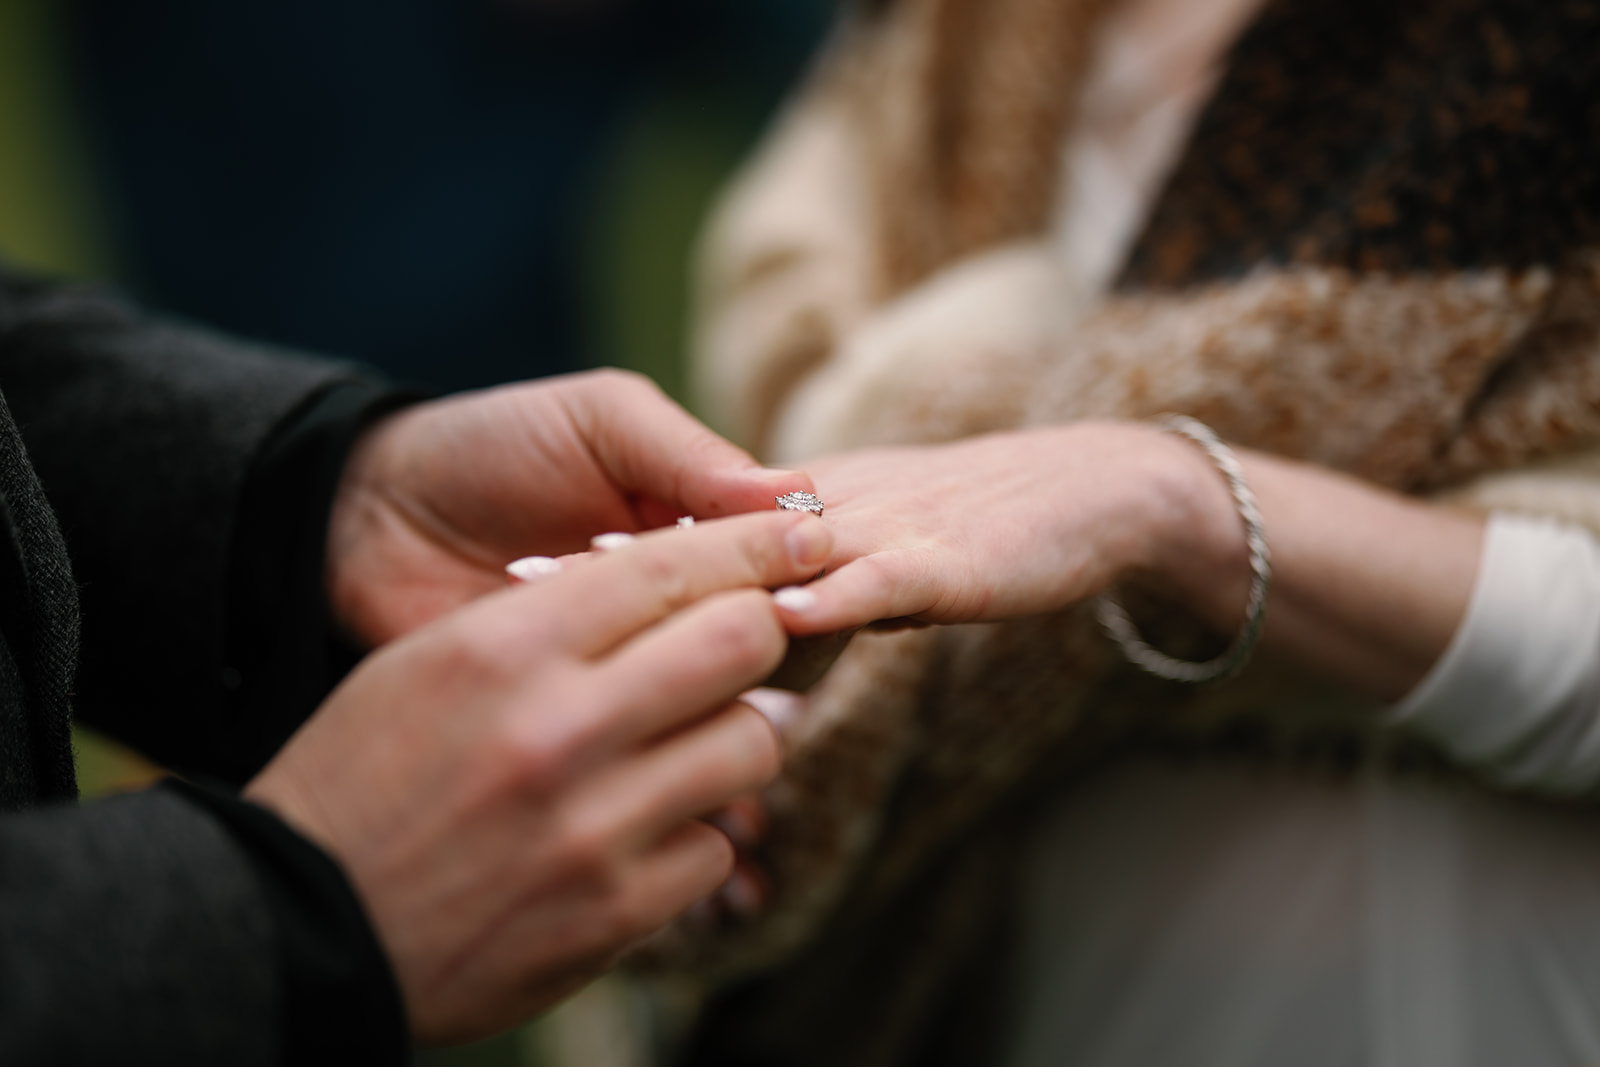 Becca and Nick exchange rings, sealing their commitment during their Isle of Skye elopement